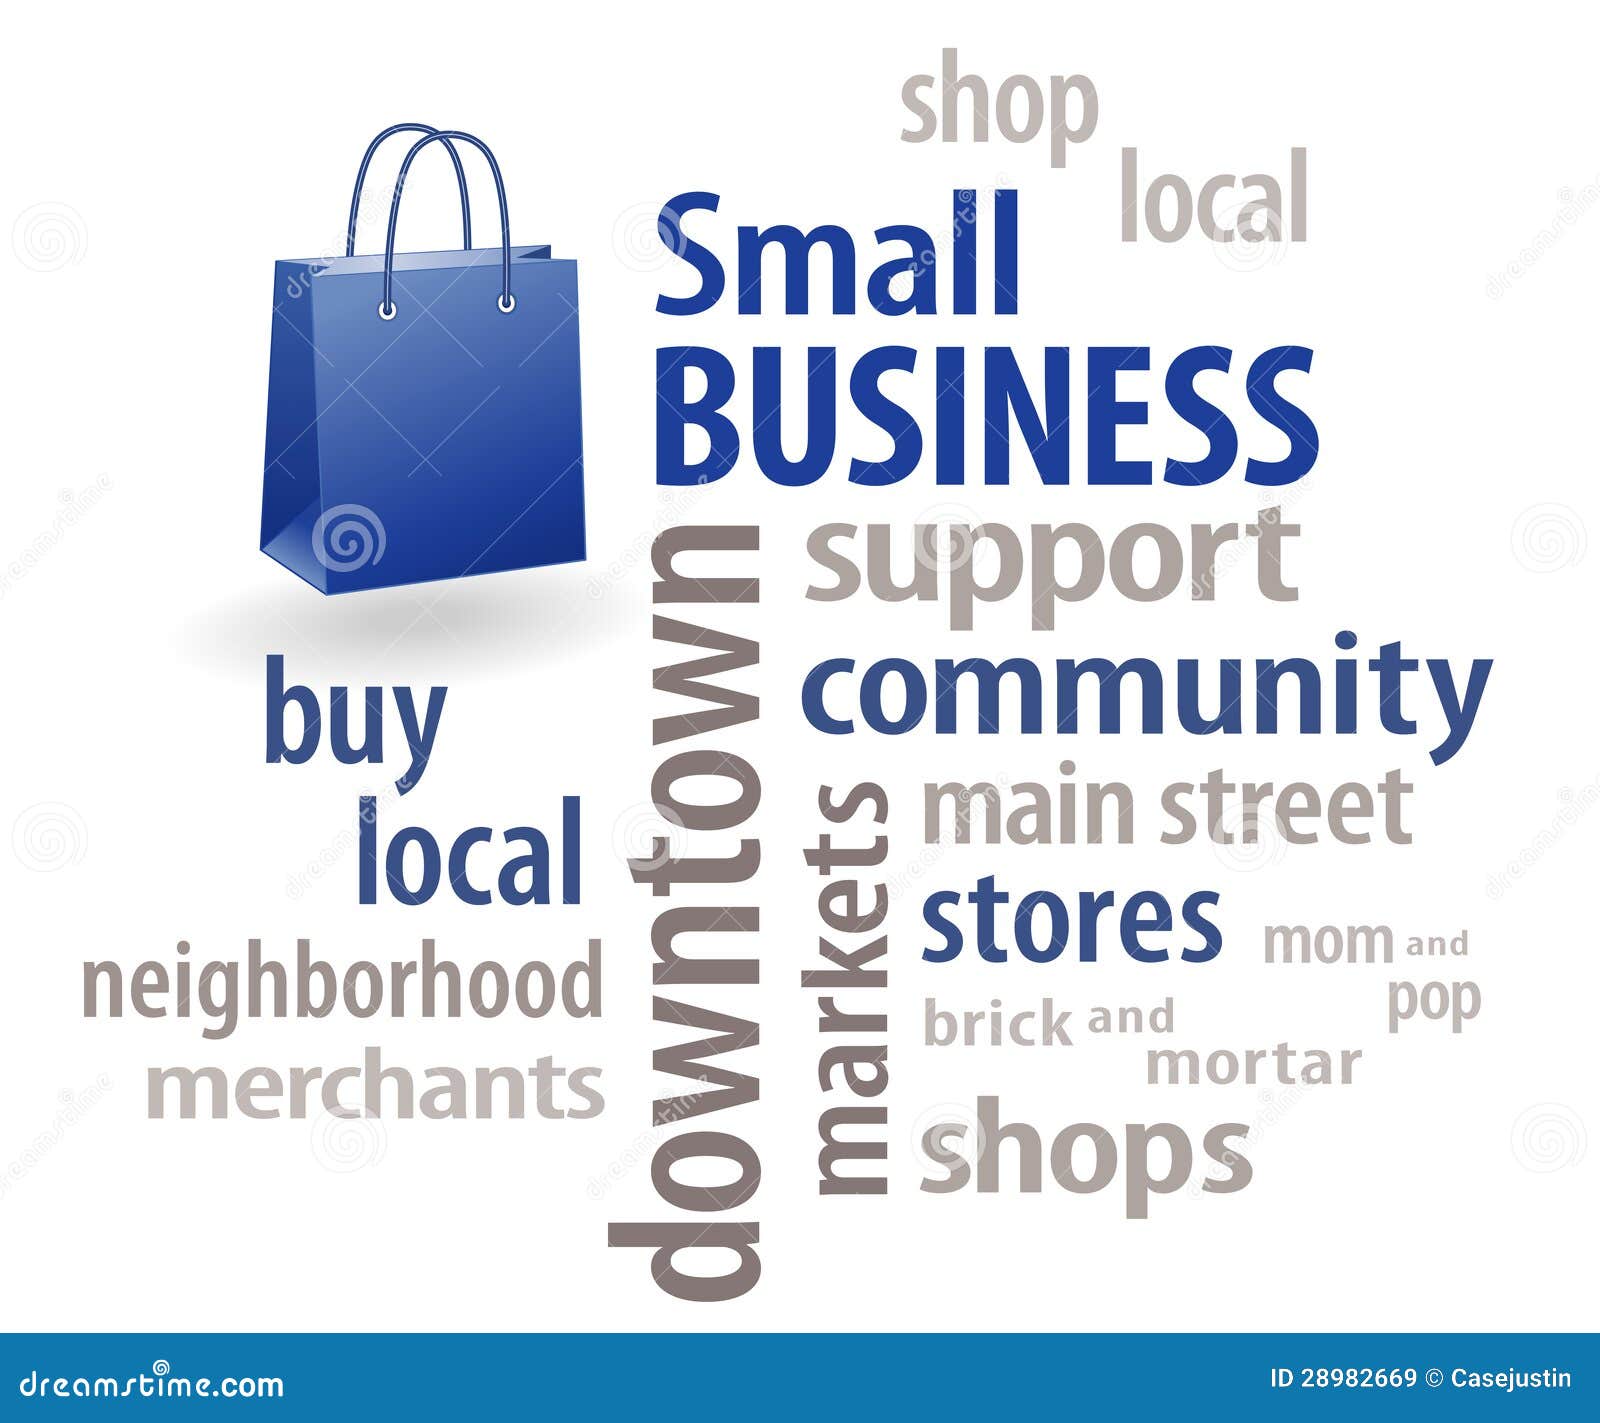 small business clipart - photo #15